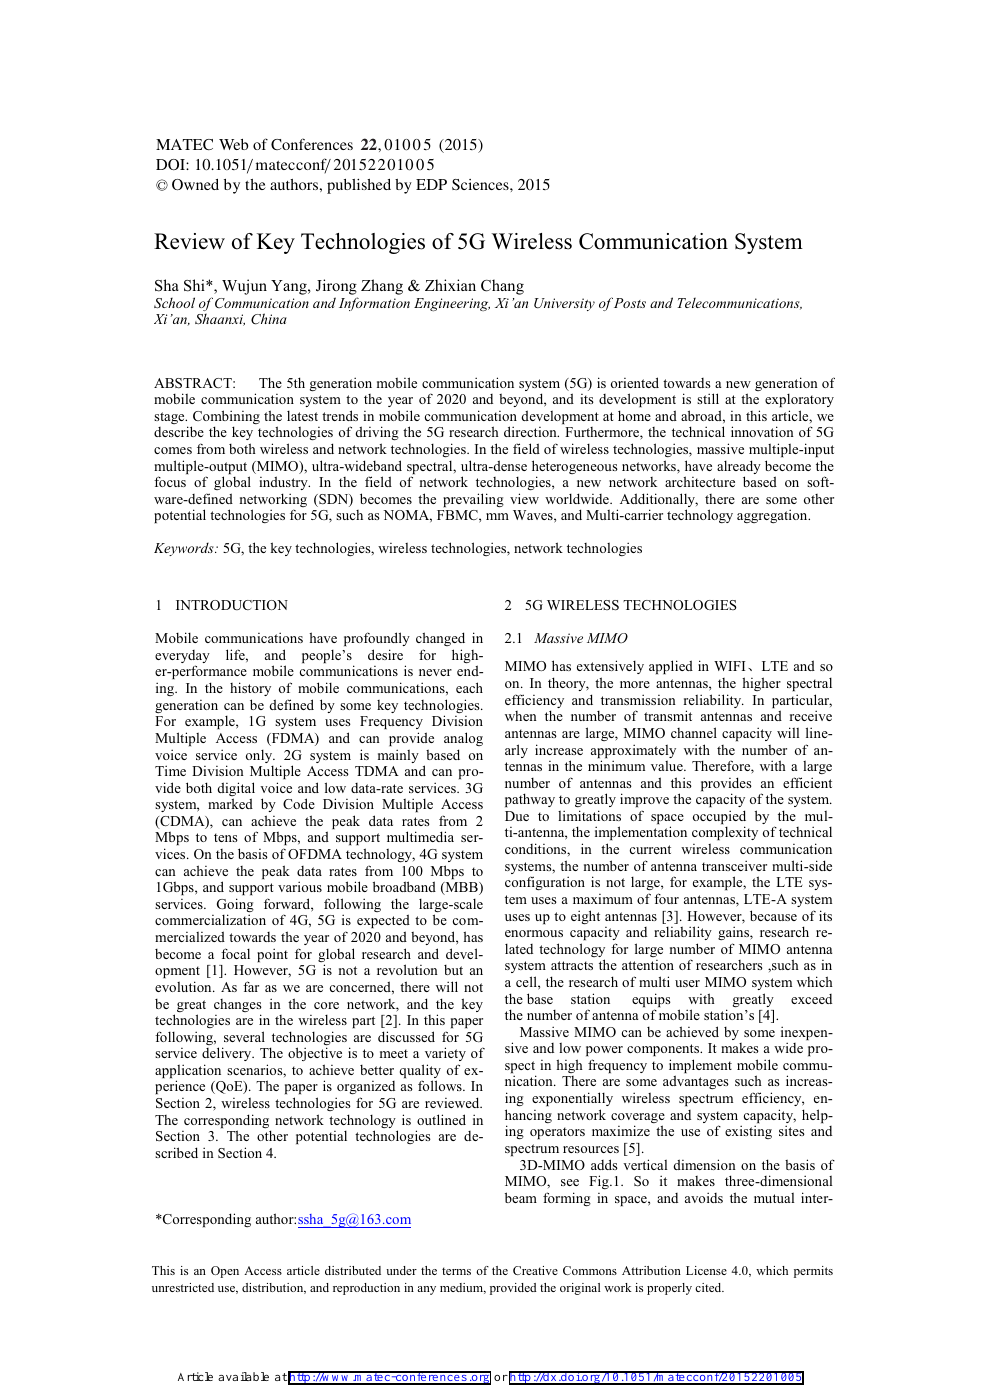 Review of Key Technologies of 5G Wireless Communication System – topic of  research paper in Electrical engineering, electronic engineering,  information engineering. Download scholarly article PDF and read for free  on CyberLeninka open